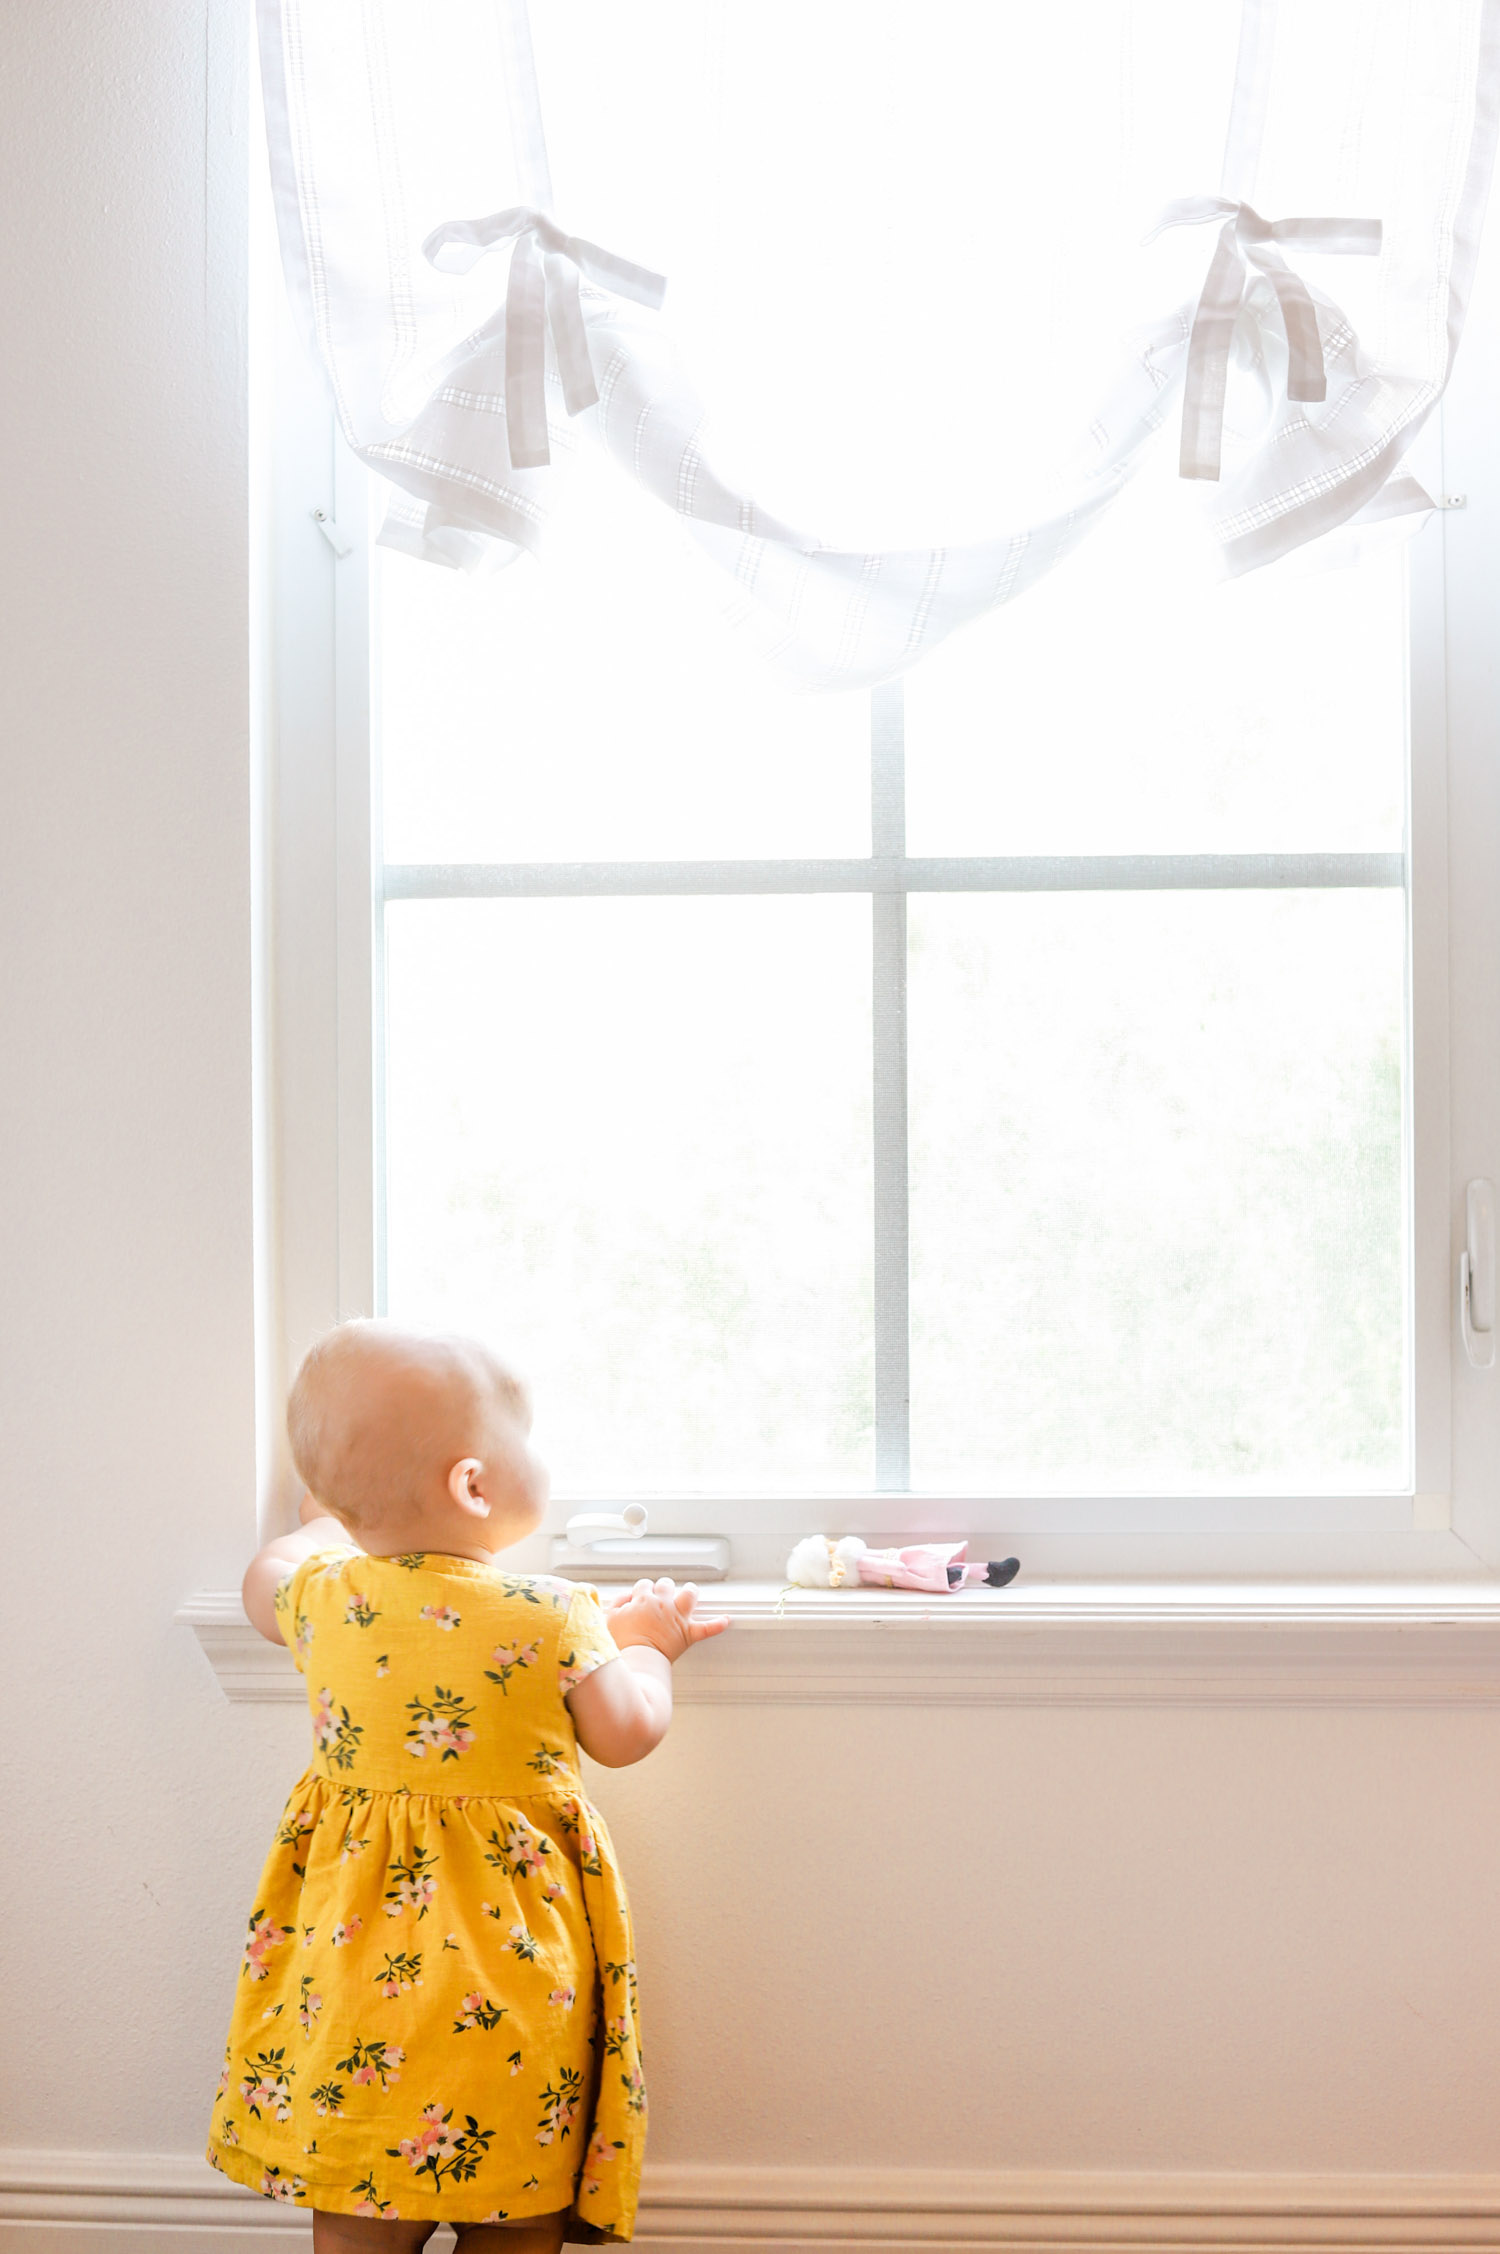 Window Cord Safety Tips for Young Children - Ashley Brooke Nicholas